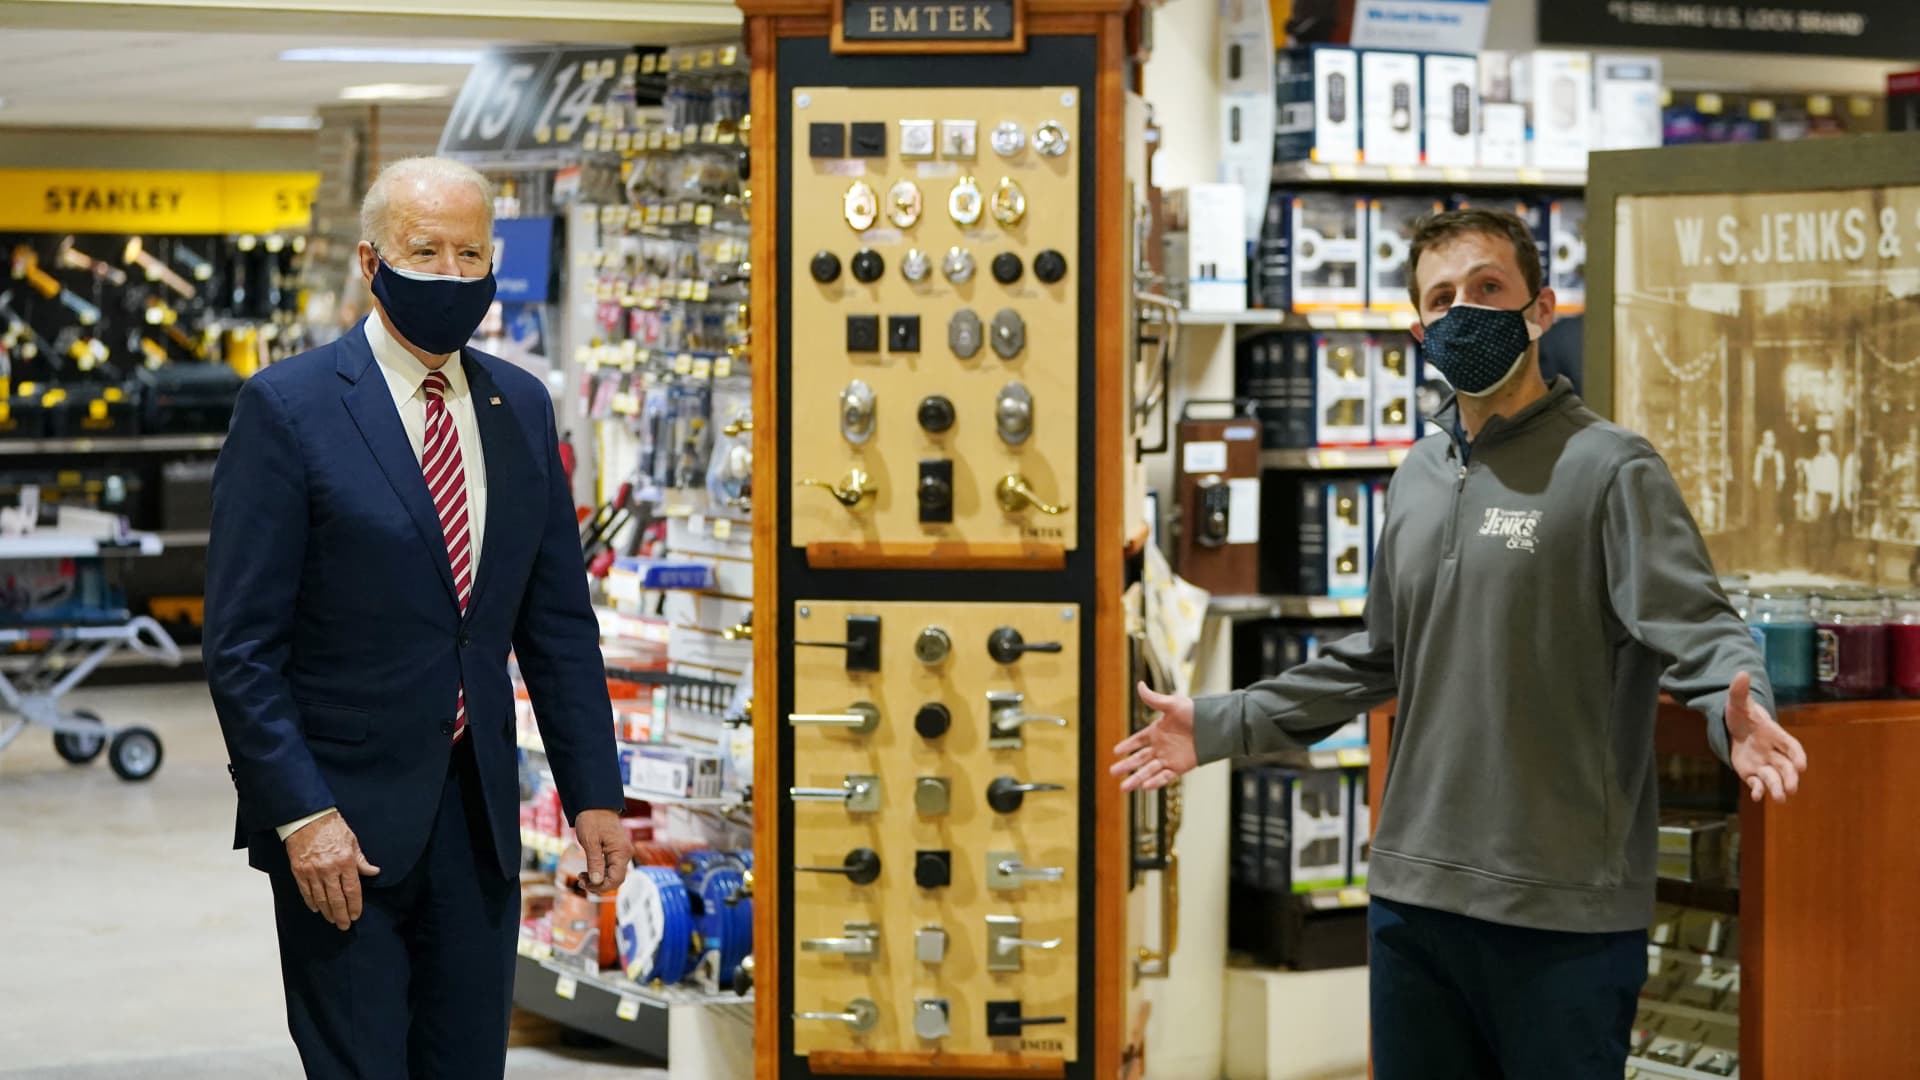 President Joe Biden visits W.S. Jenks & Son, a Washington, D.C., hardware store that benefited from a Paycheck Protection Program loan, on March 9, 2021.